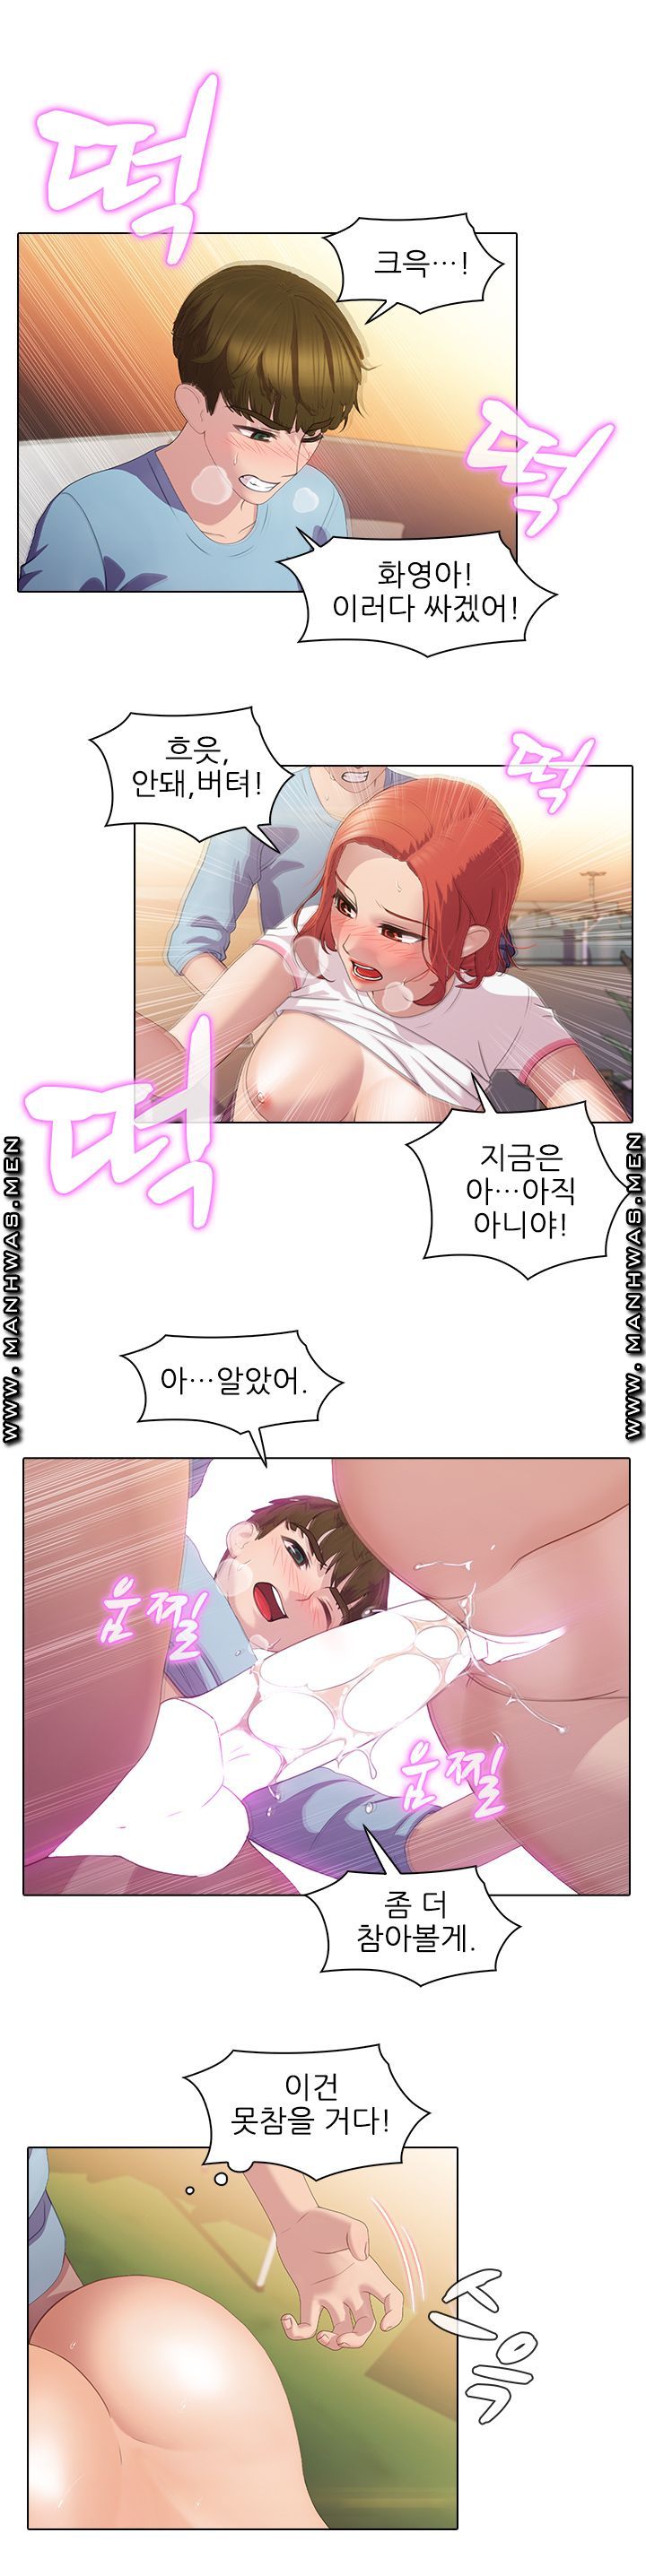 Sister's Friend Raw - Chapter 5 Page 10